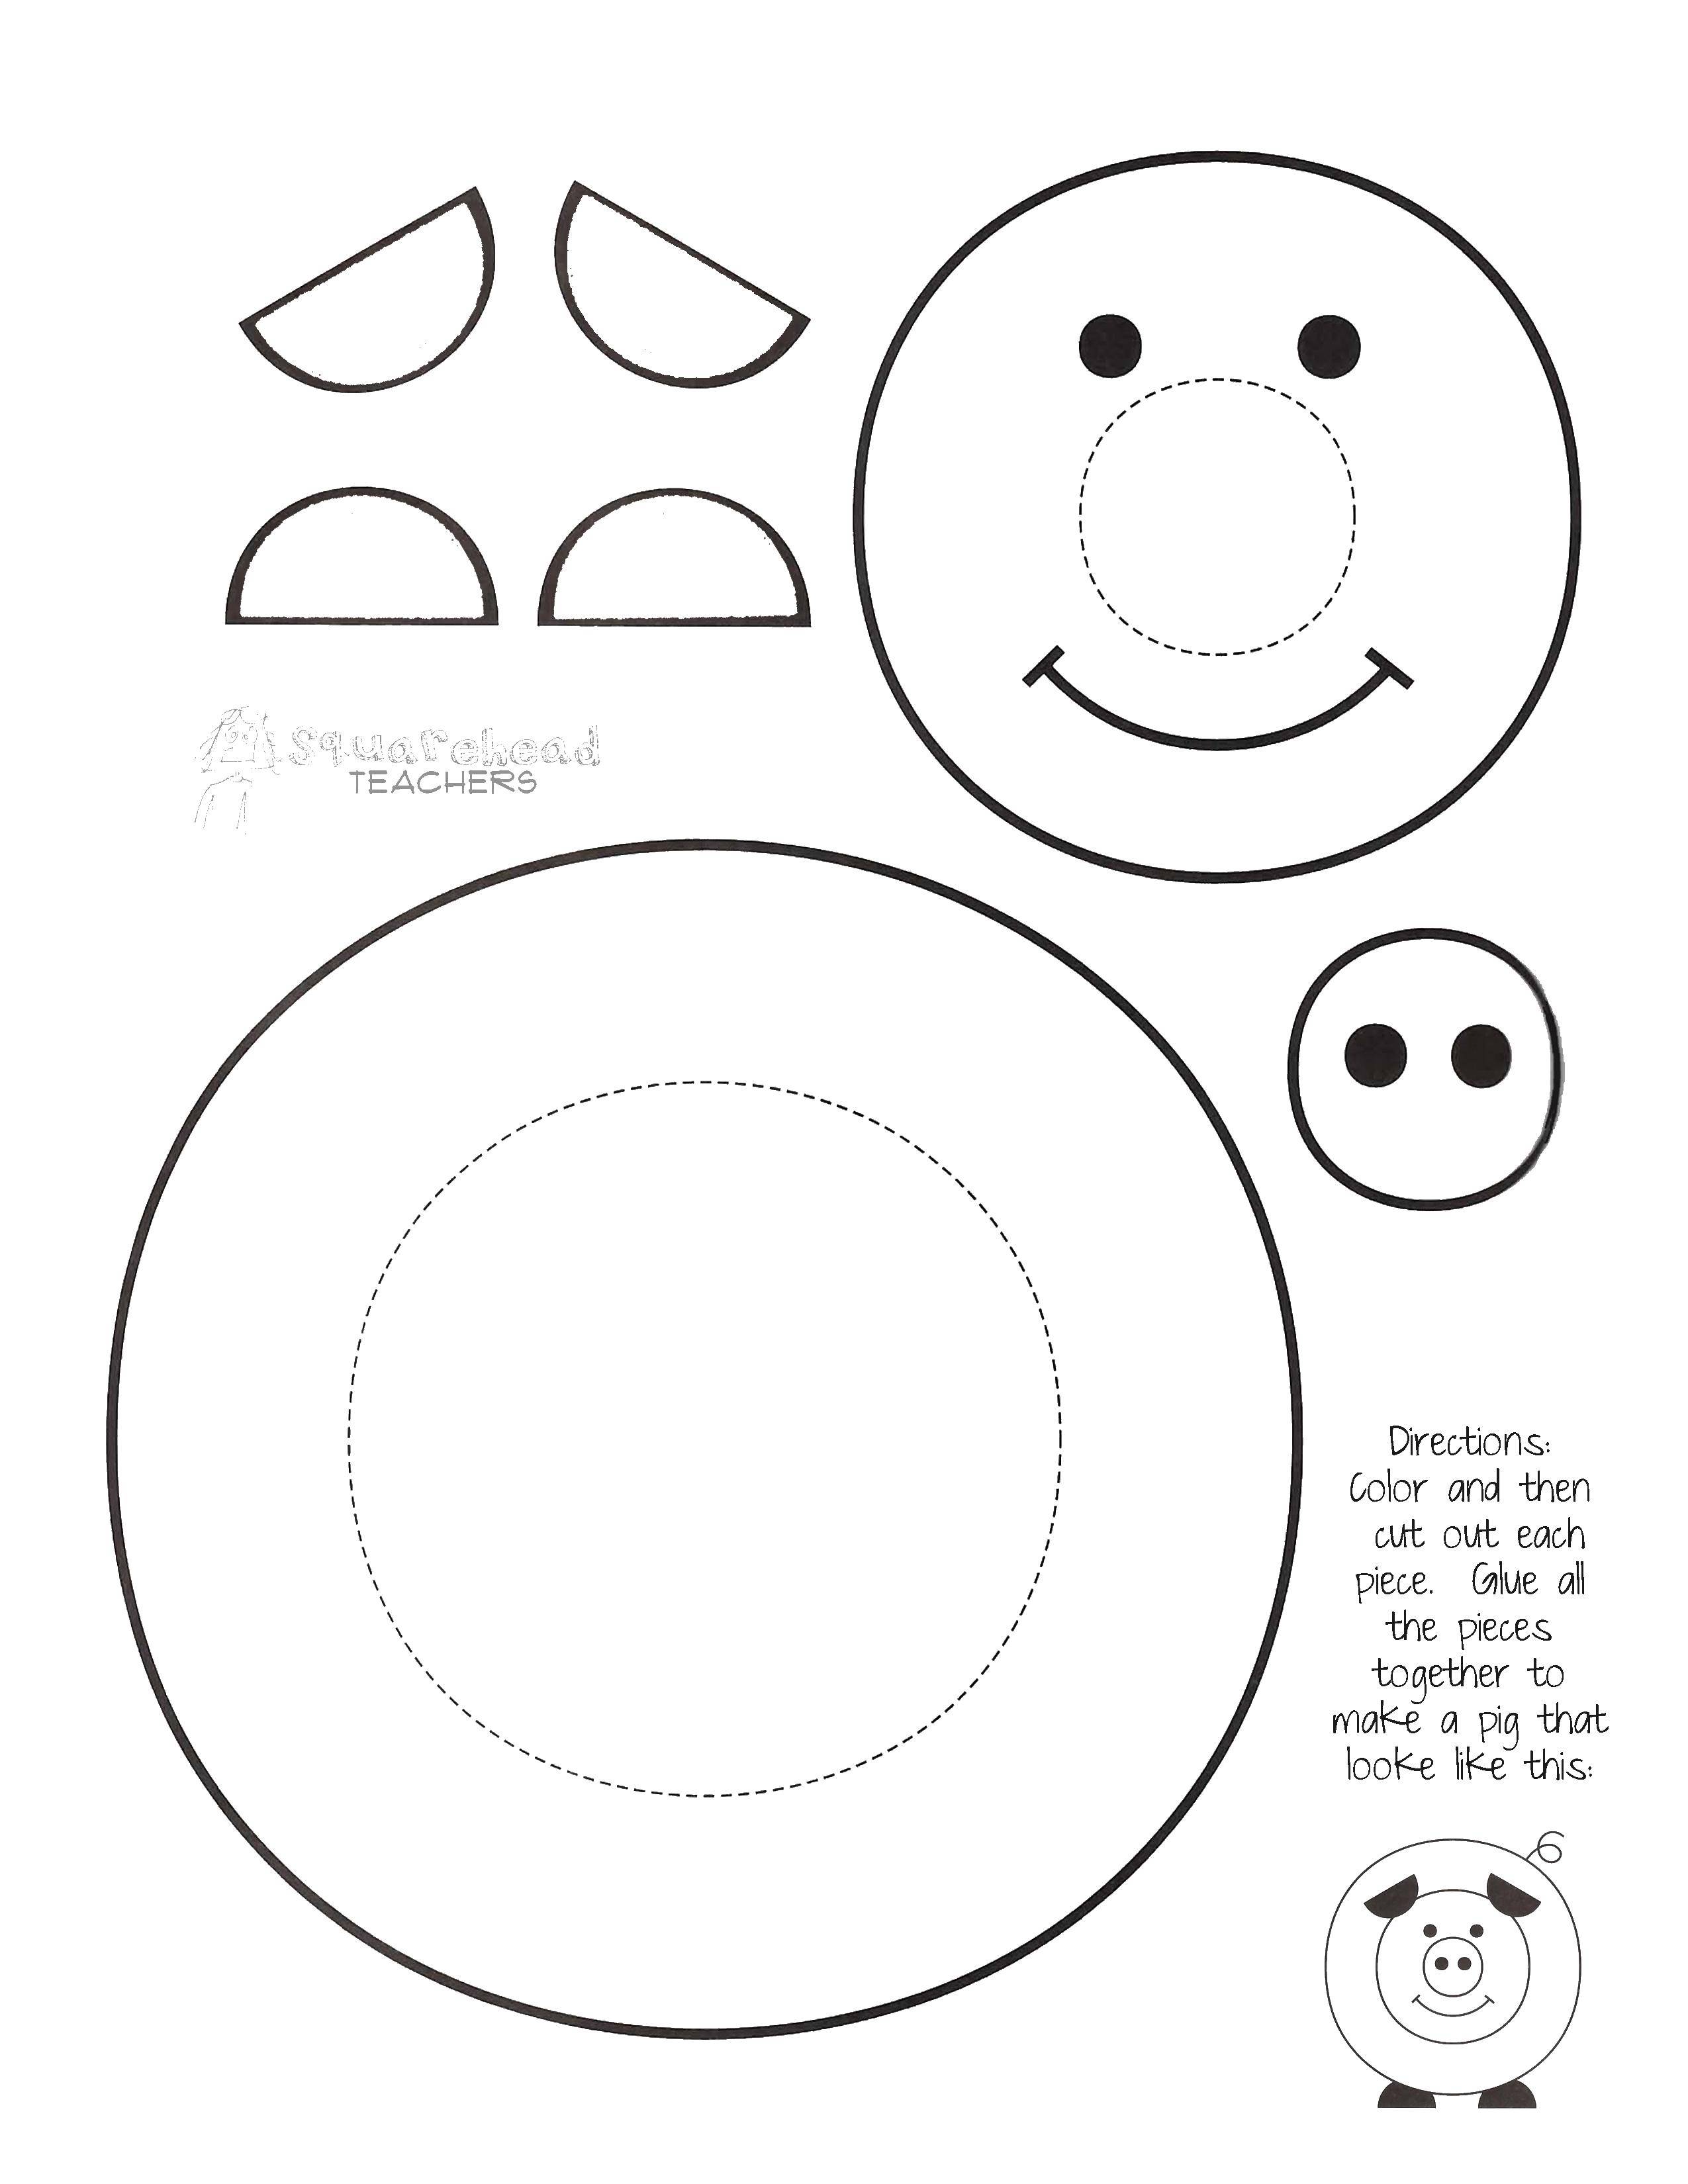 Coloring Stencils for carving pigs. Category Stencils for cutting out. Tags:  stencils, templates, mumps.